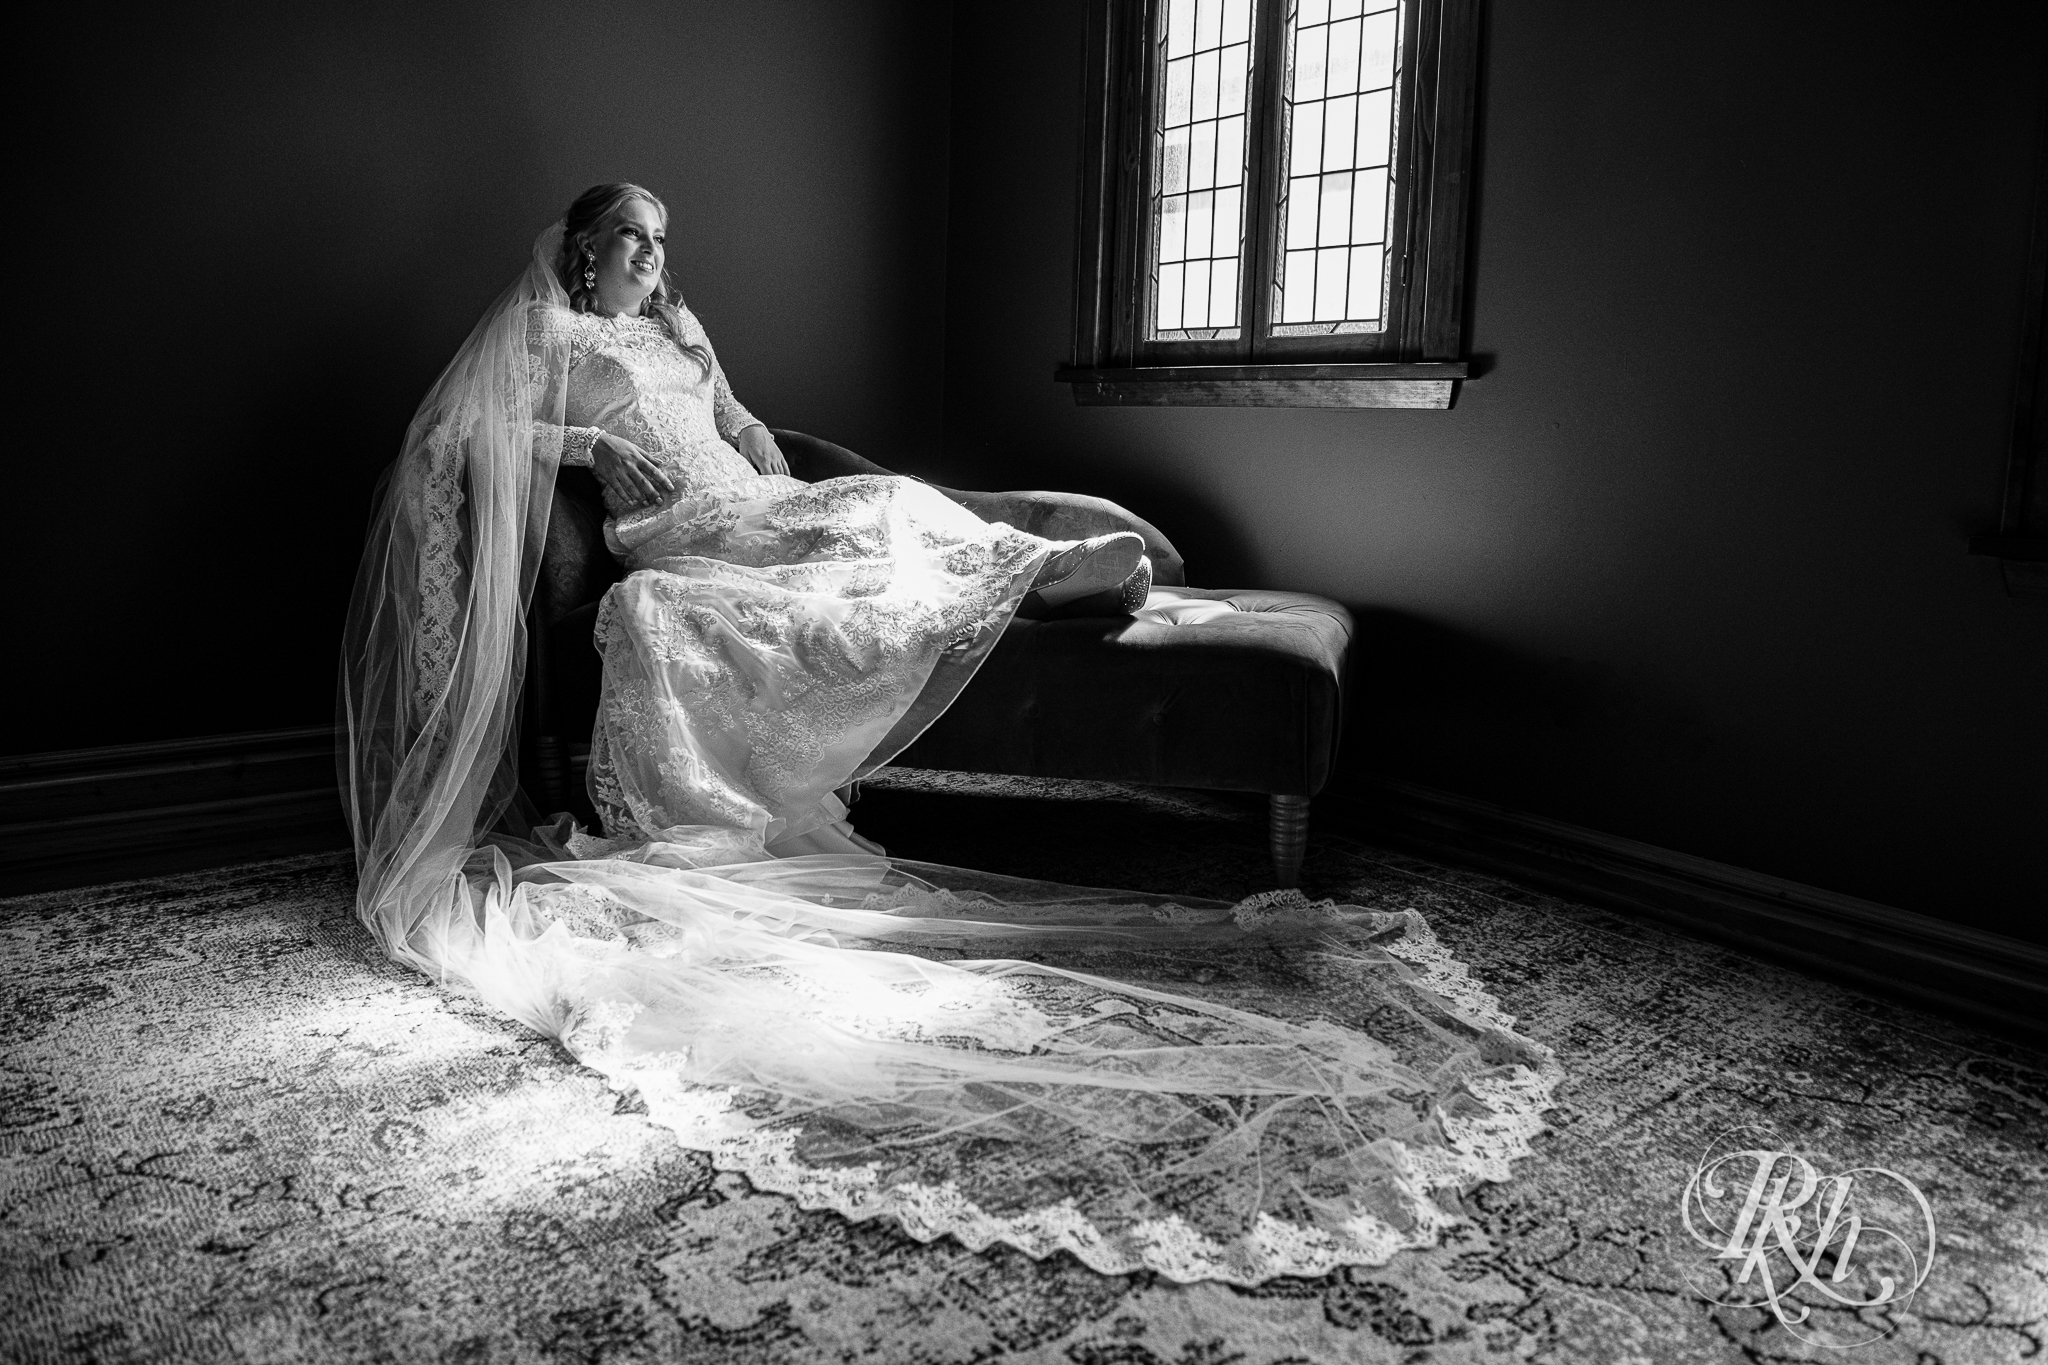 Bride sitting on couch in long sleeve wedding dress and cathedral veil at Weddings at the Broz in New Prague, Minnesota.